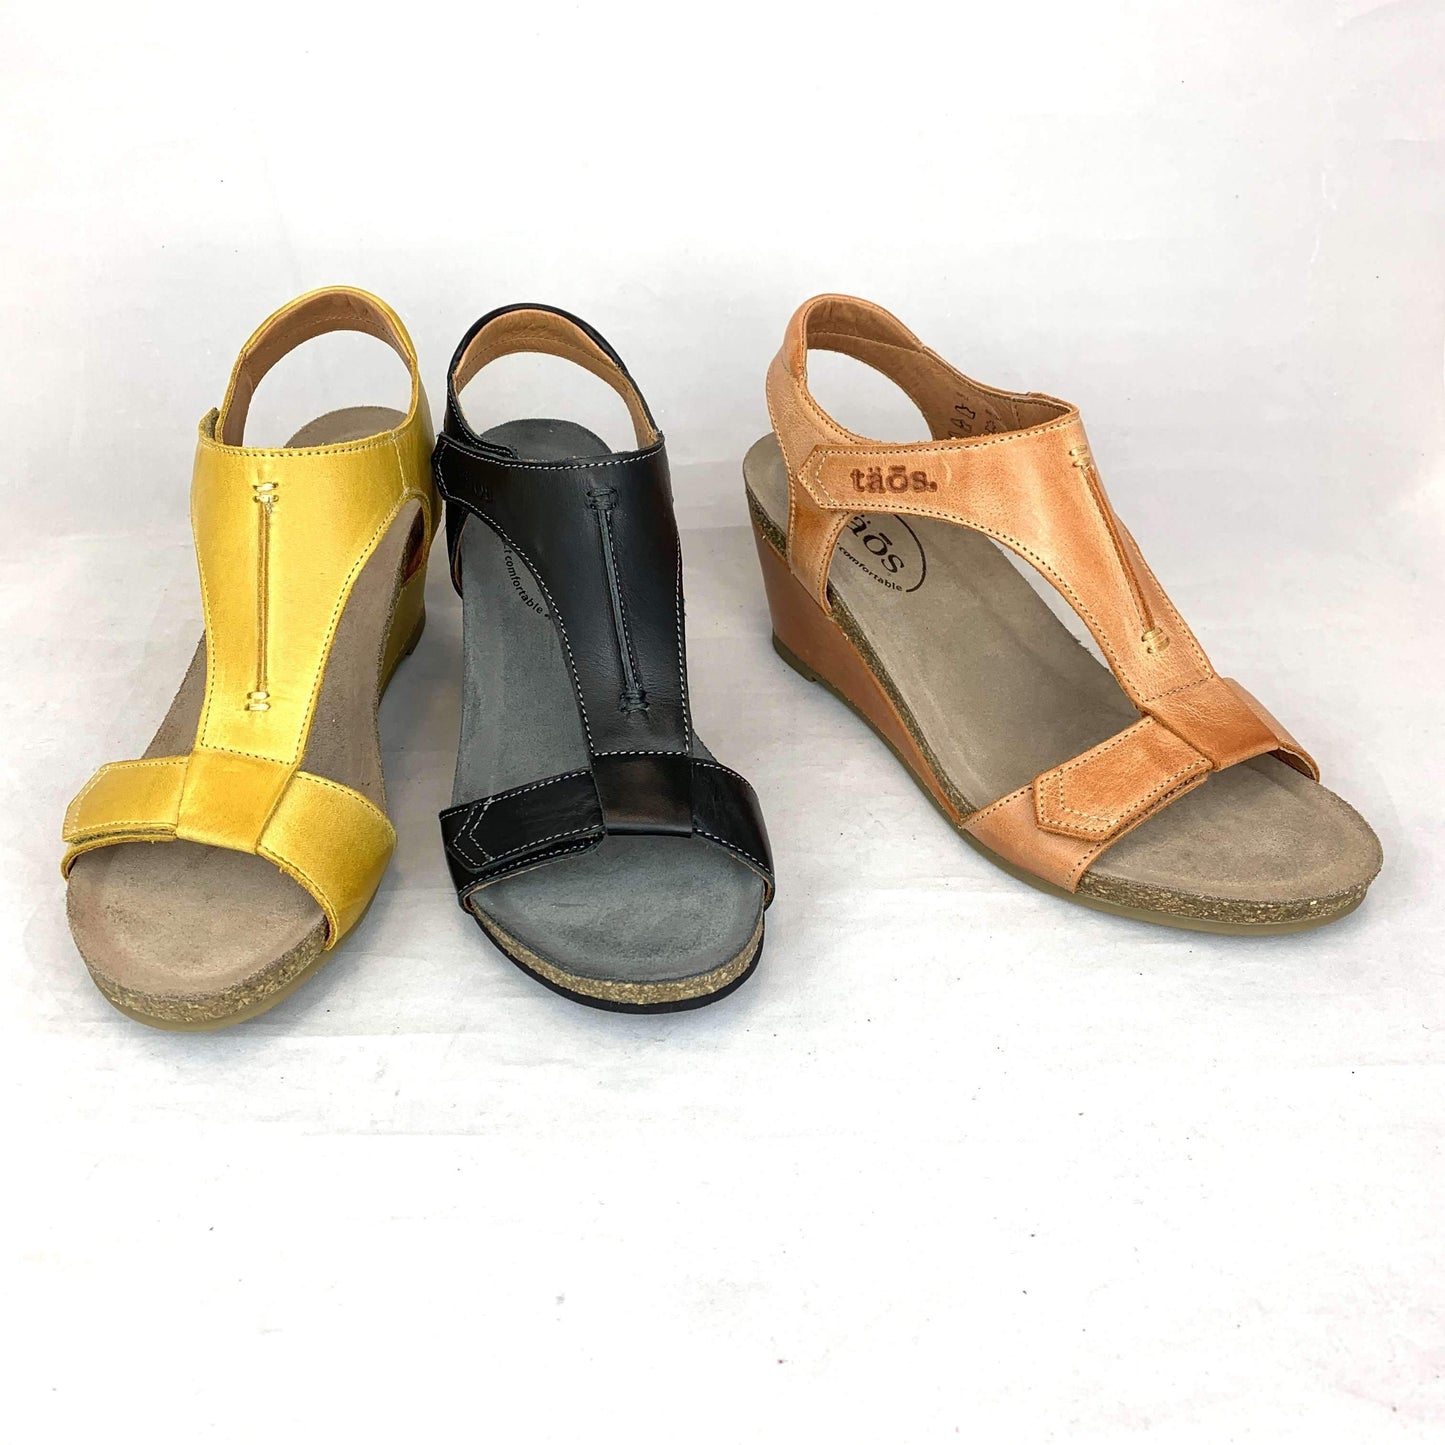 [Taos- Sheila Wedge with Adjustable Straps], [Sandals], [TAOS], [Plum Bottom].